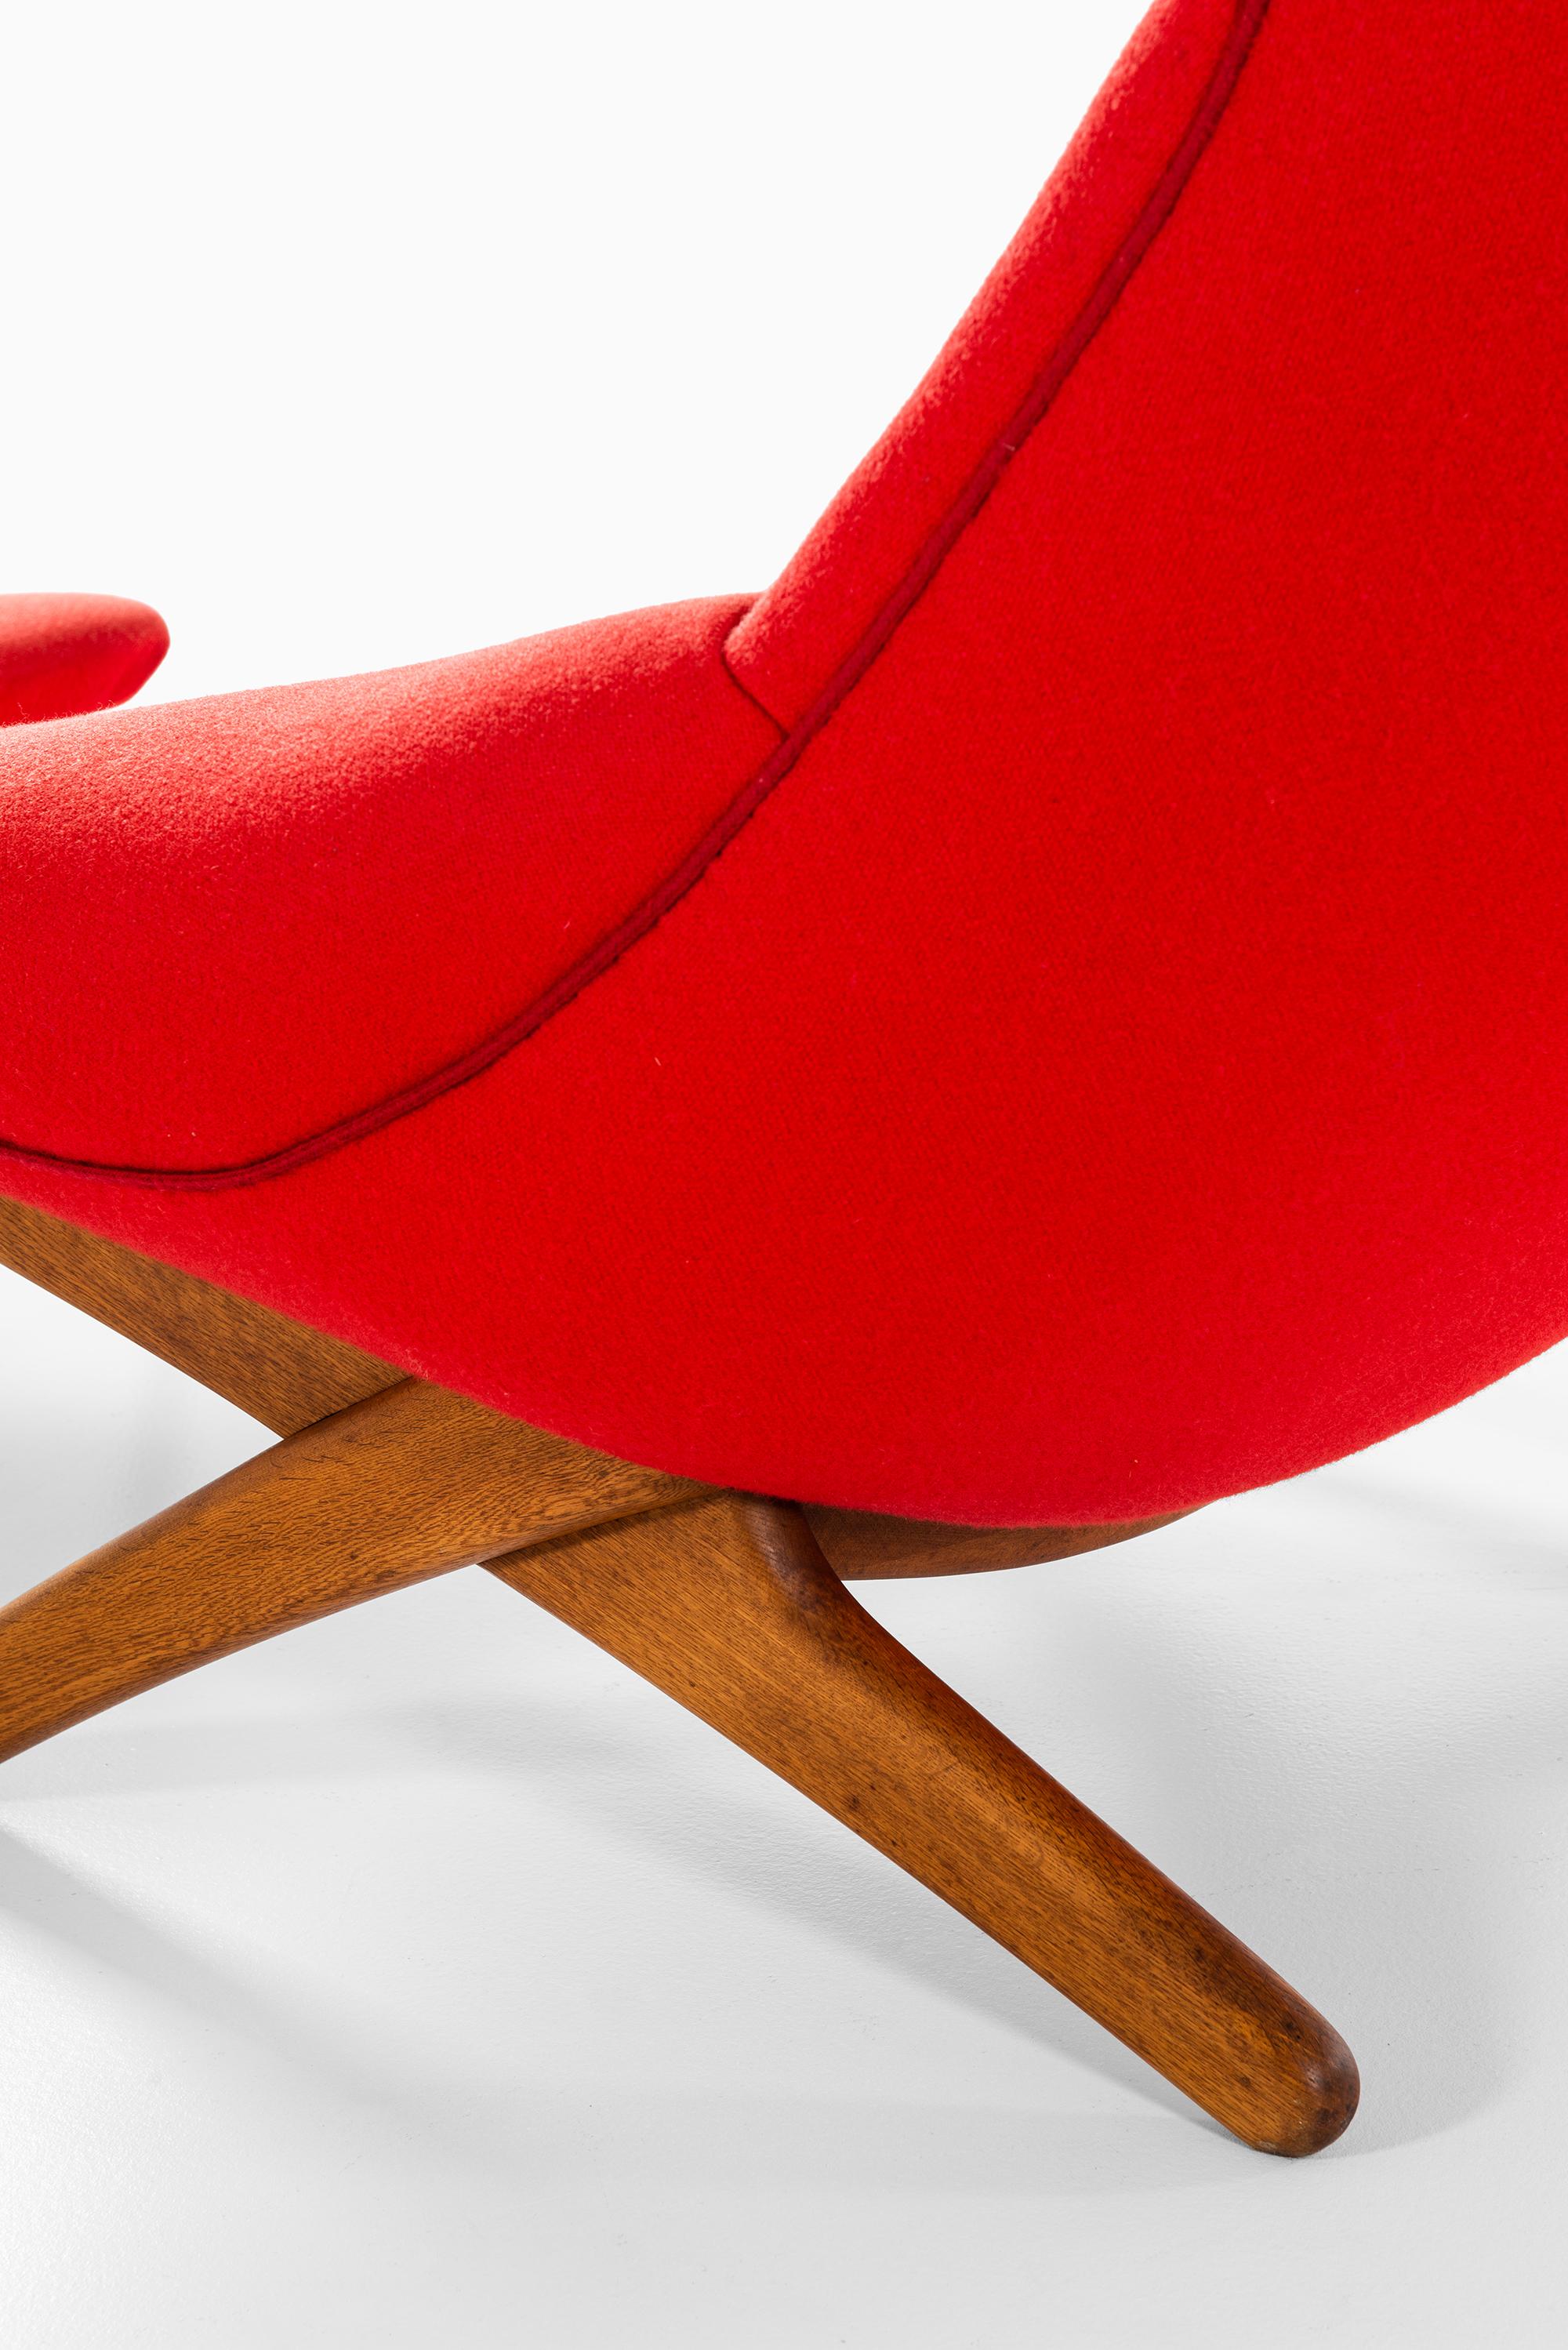 Mid-20th Century Illum Wikkelsø Easy Chair Model ML-91 with Stool Produced by Michael Laursen For Sale